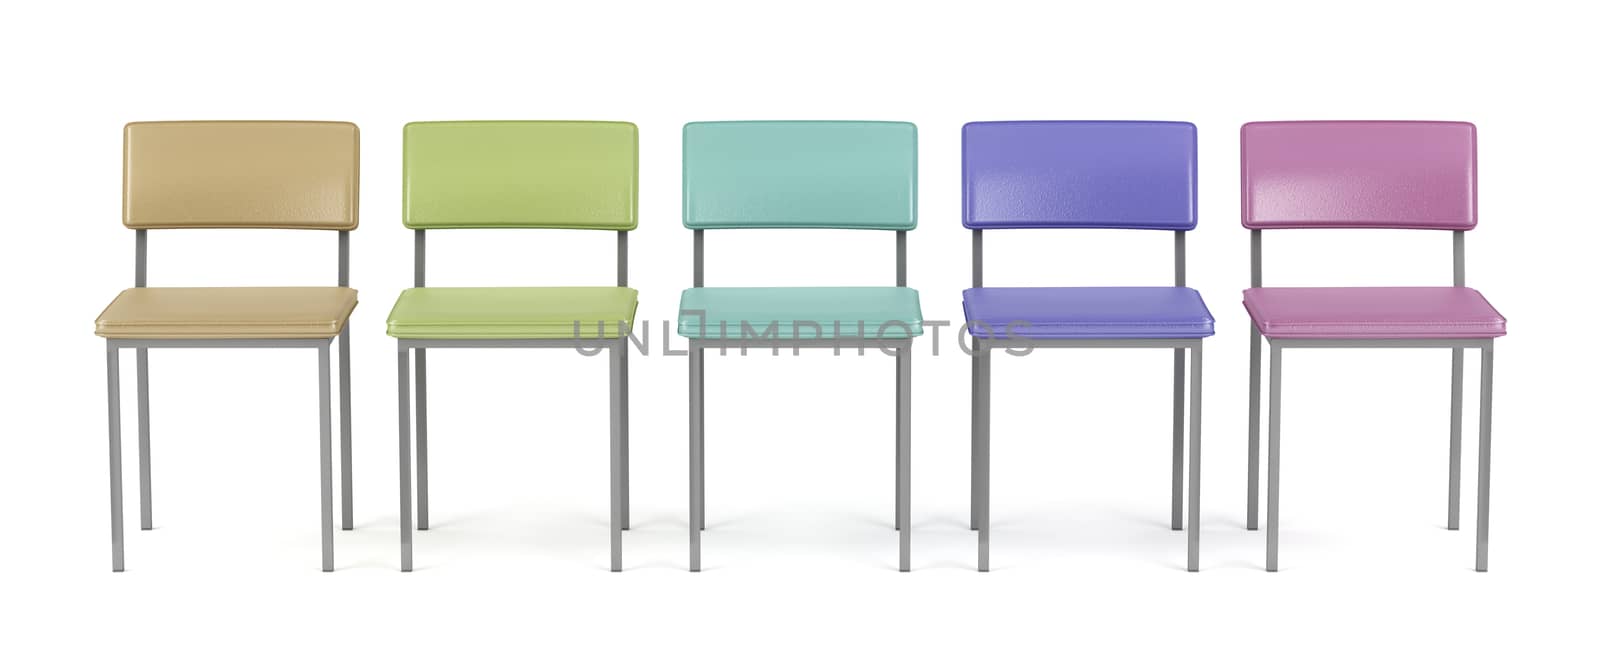 Front view of colorful chairs in a row